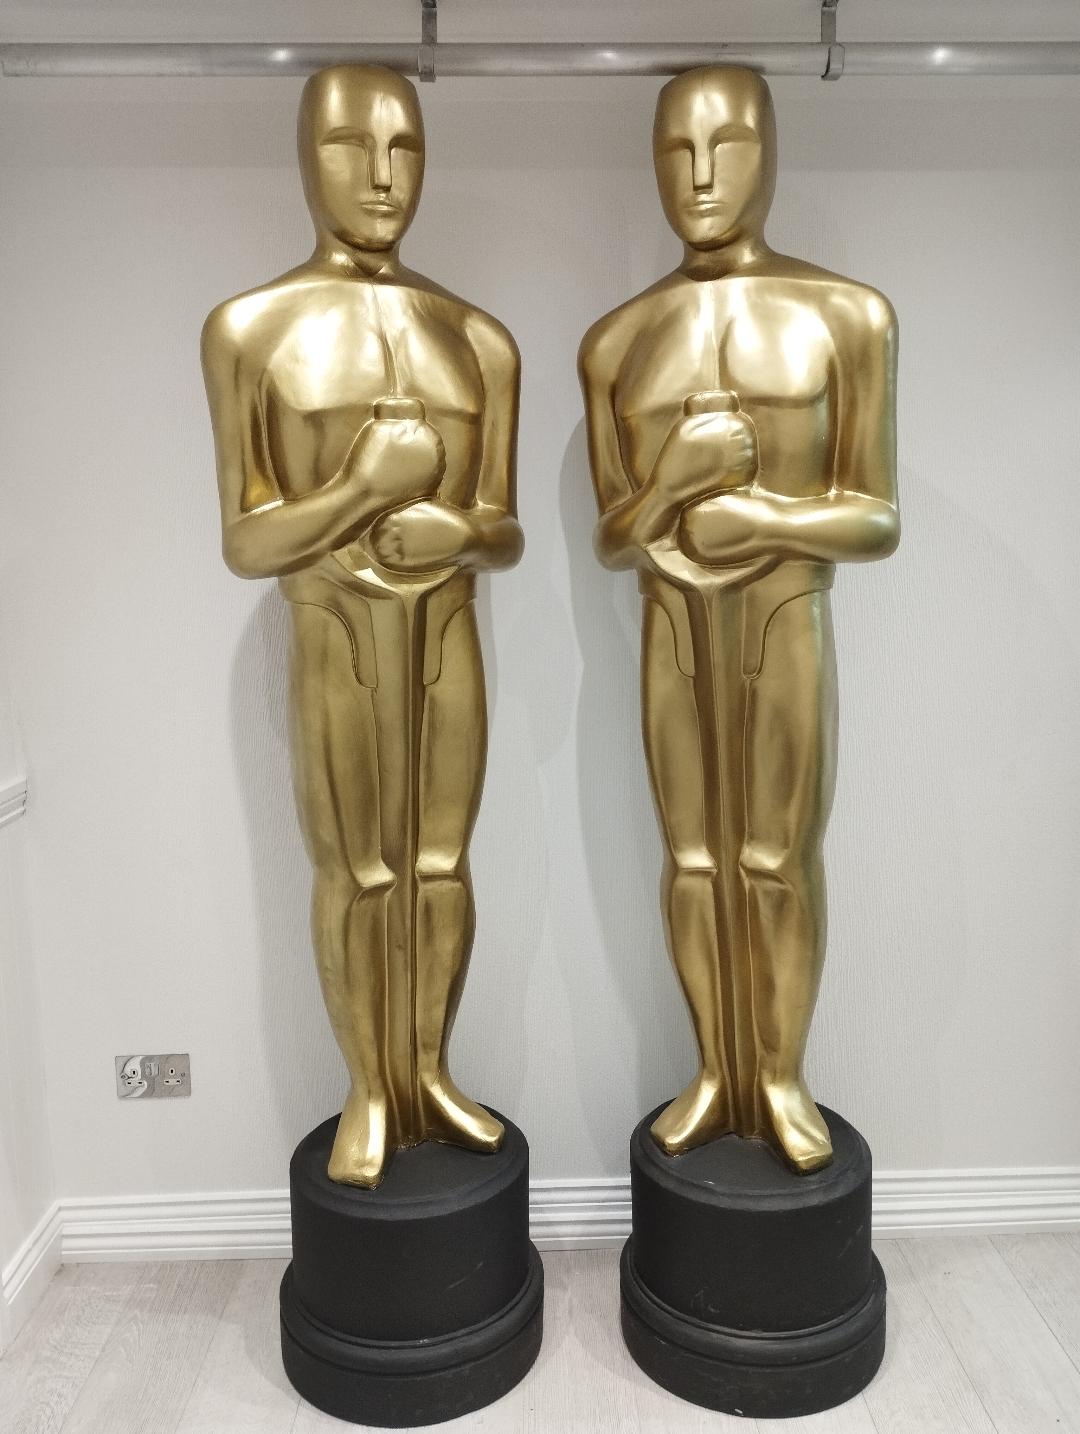 The 'Oscar' statuette is 13½ inches tall, weighs 8½ pounds and is made of  solid bronze plated in 24-karat gold. : r/interestingasfuck